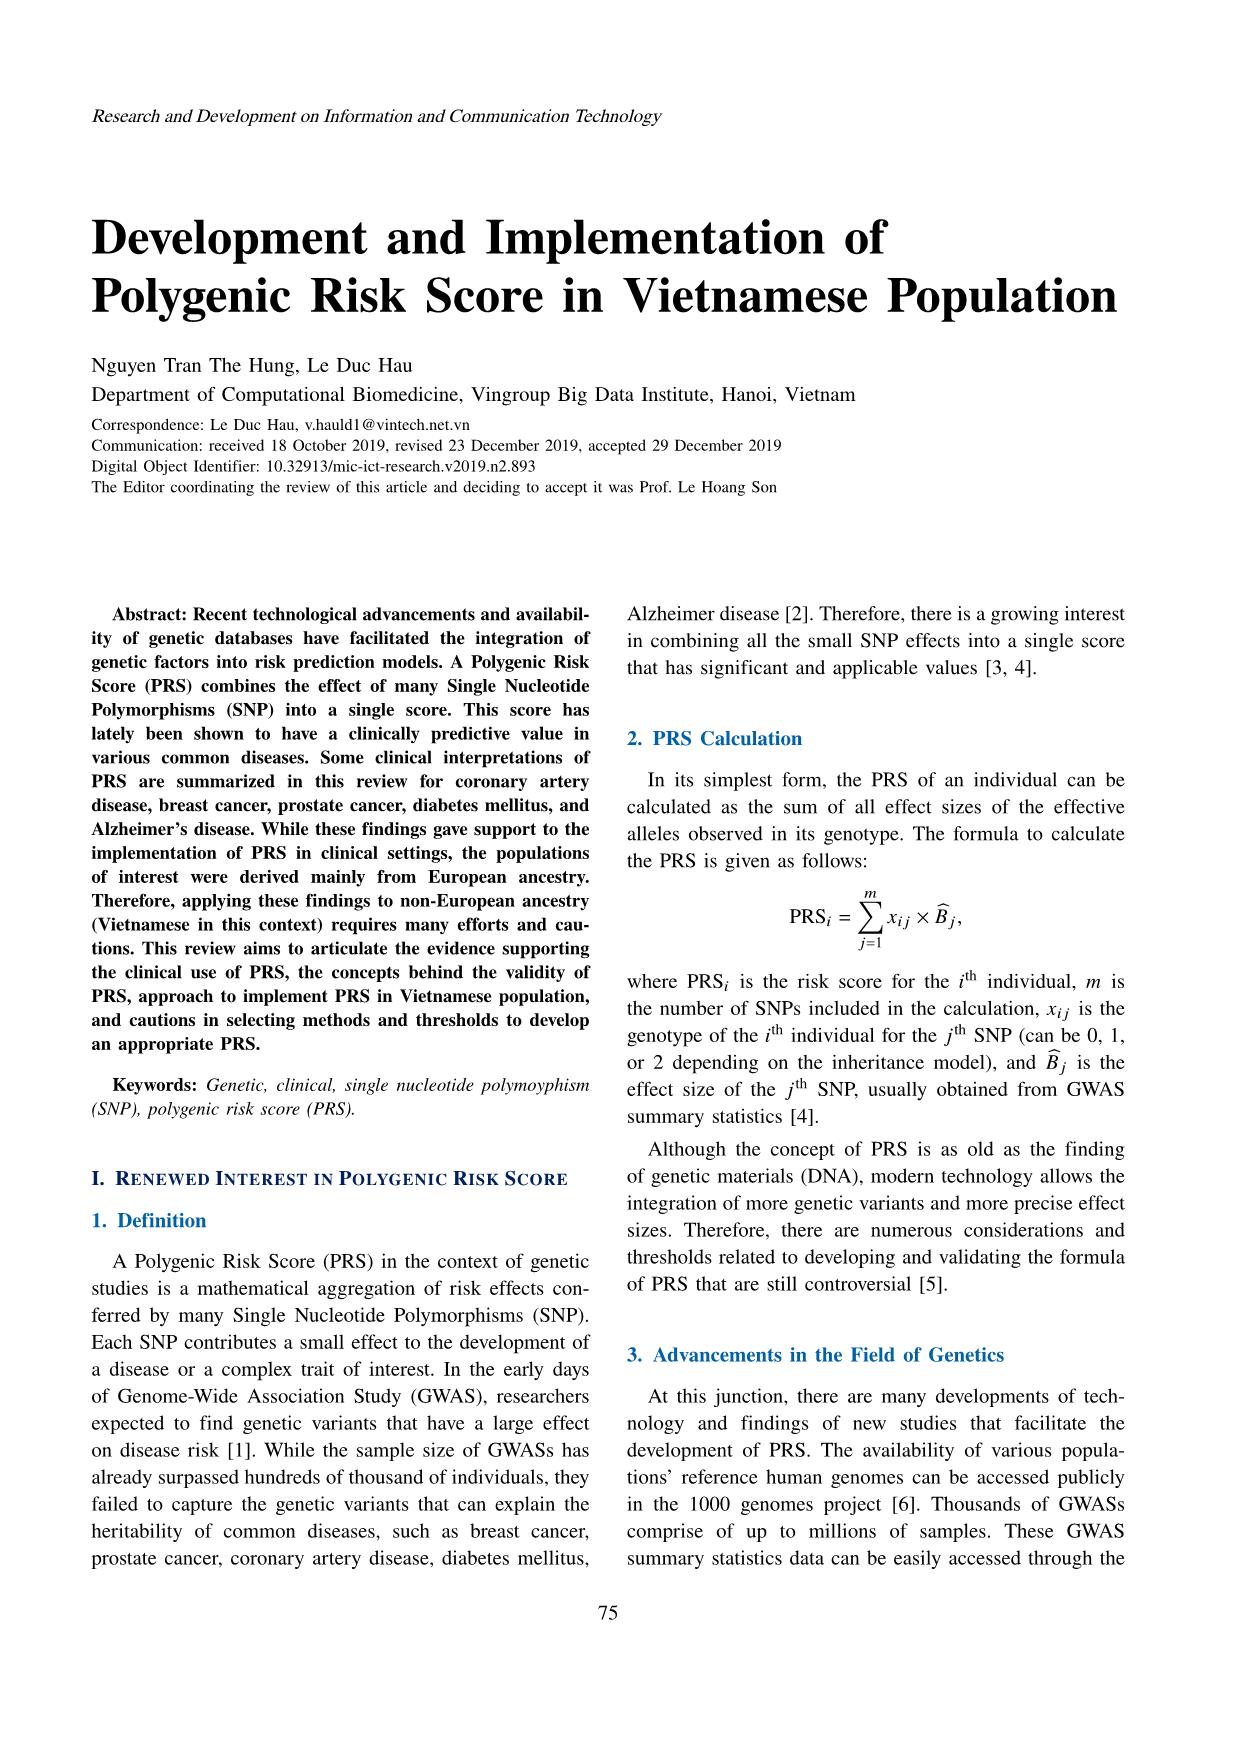 Development and implementation of polygenic risk score in Vietnamese population trang 1